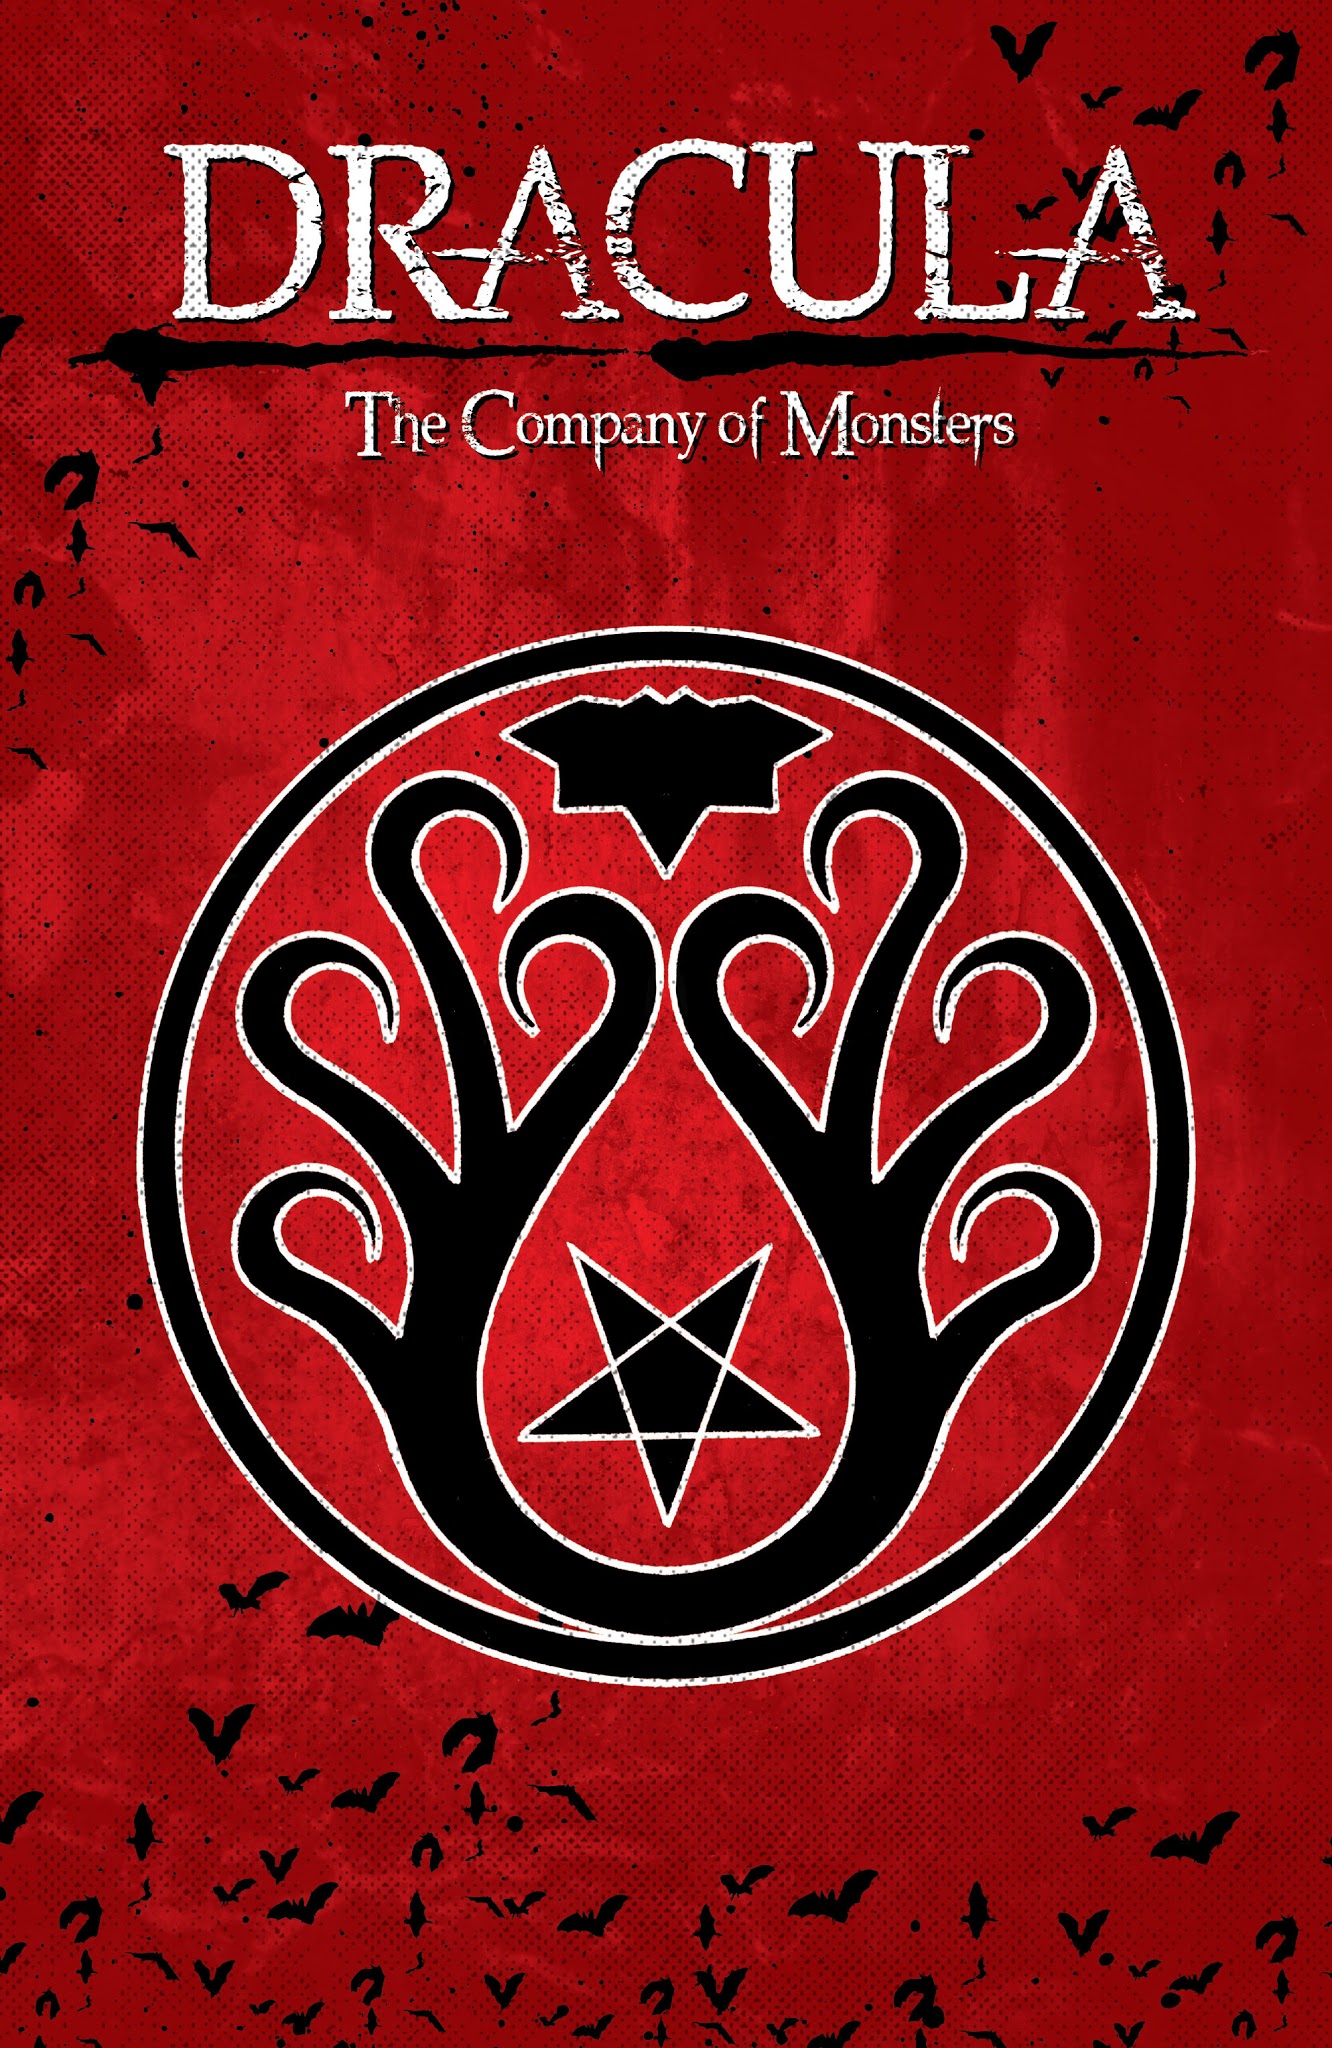 Read online Dracula: The Company of Monsters comic -  Issue # TPB 1 - 2